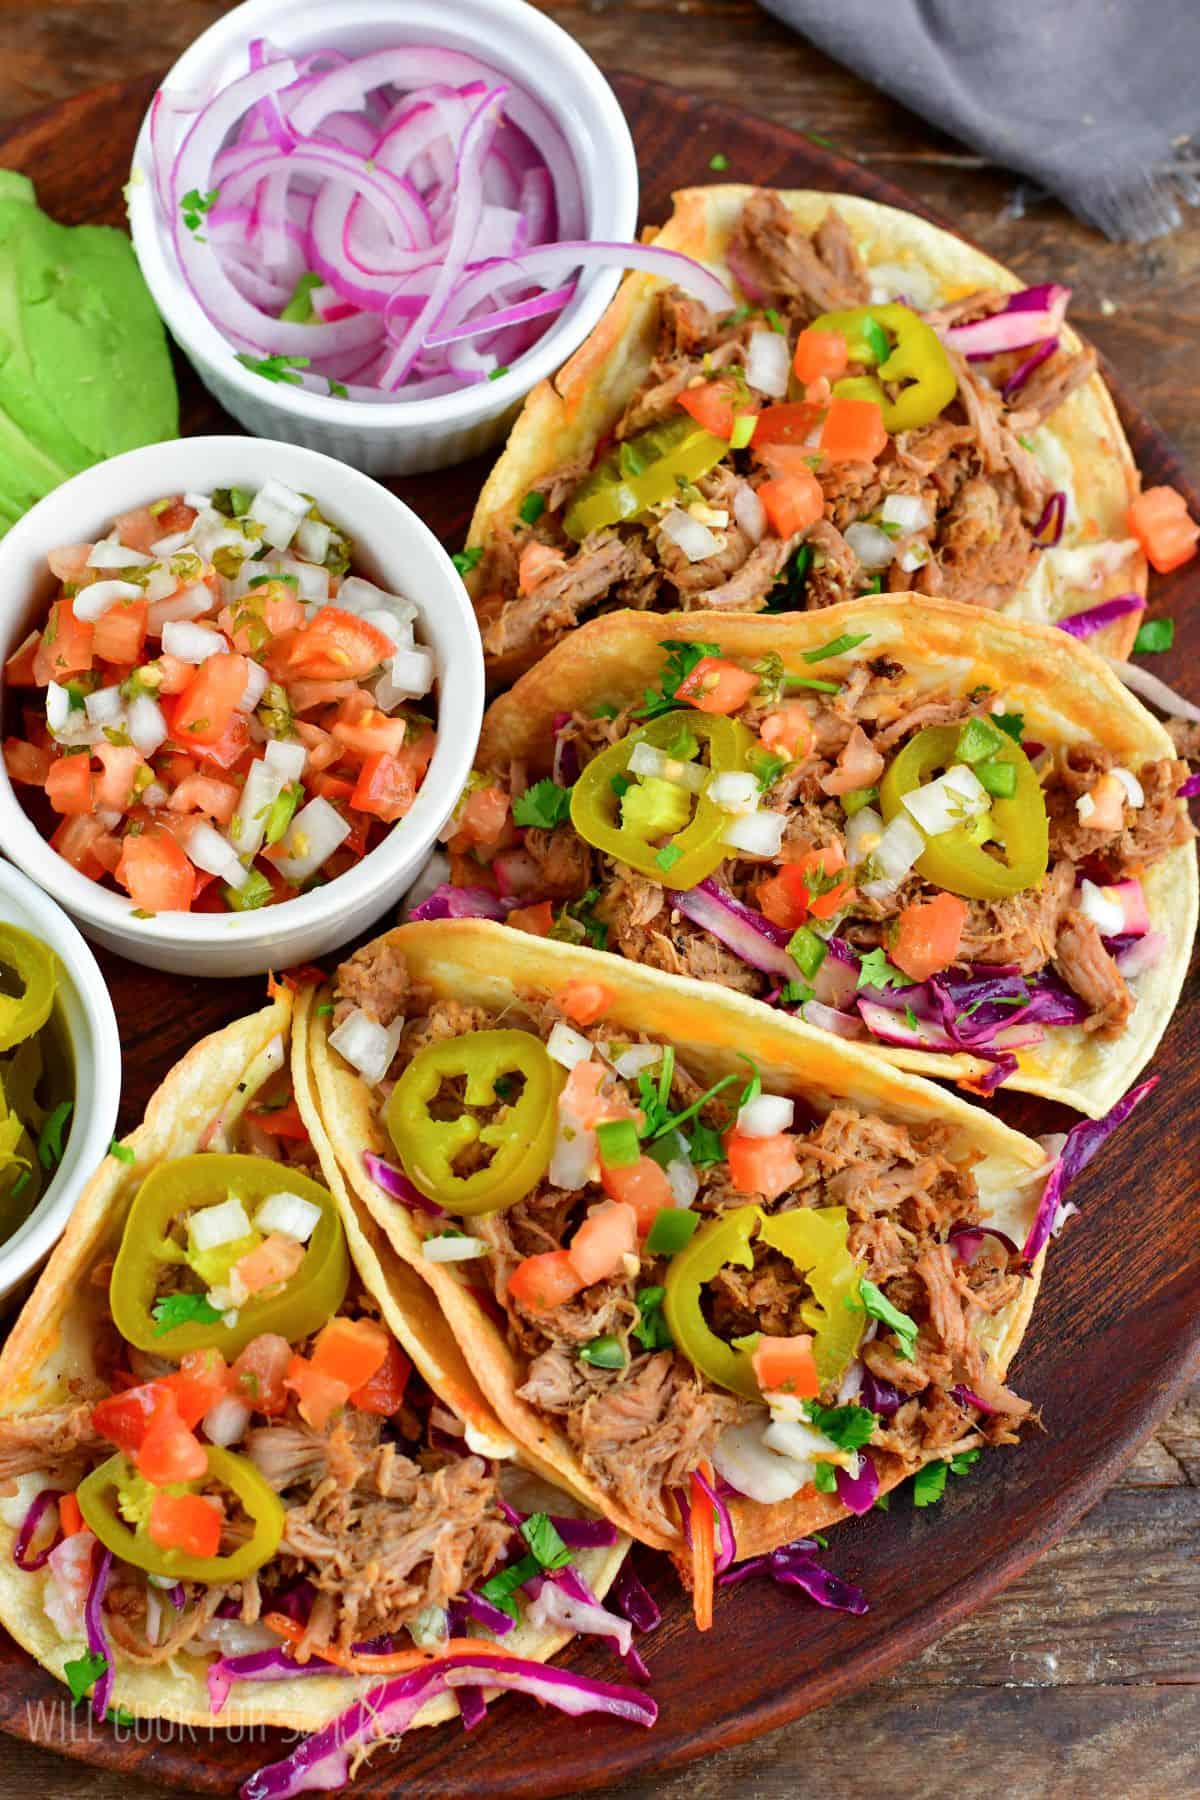 Four pulled pork tacos on a wooden plate with red onion, Pico de Gallo and pickled jalapenos in small bowls.